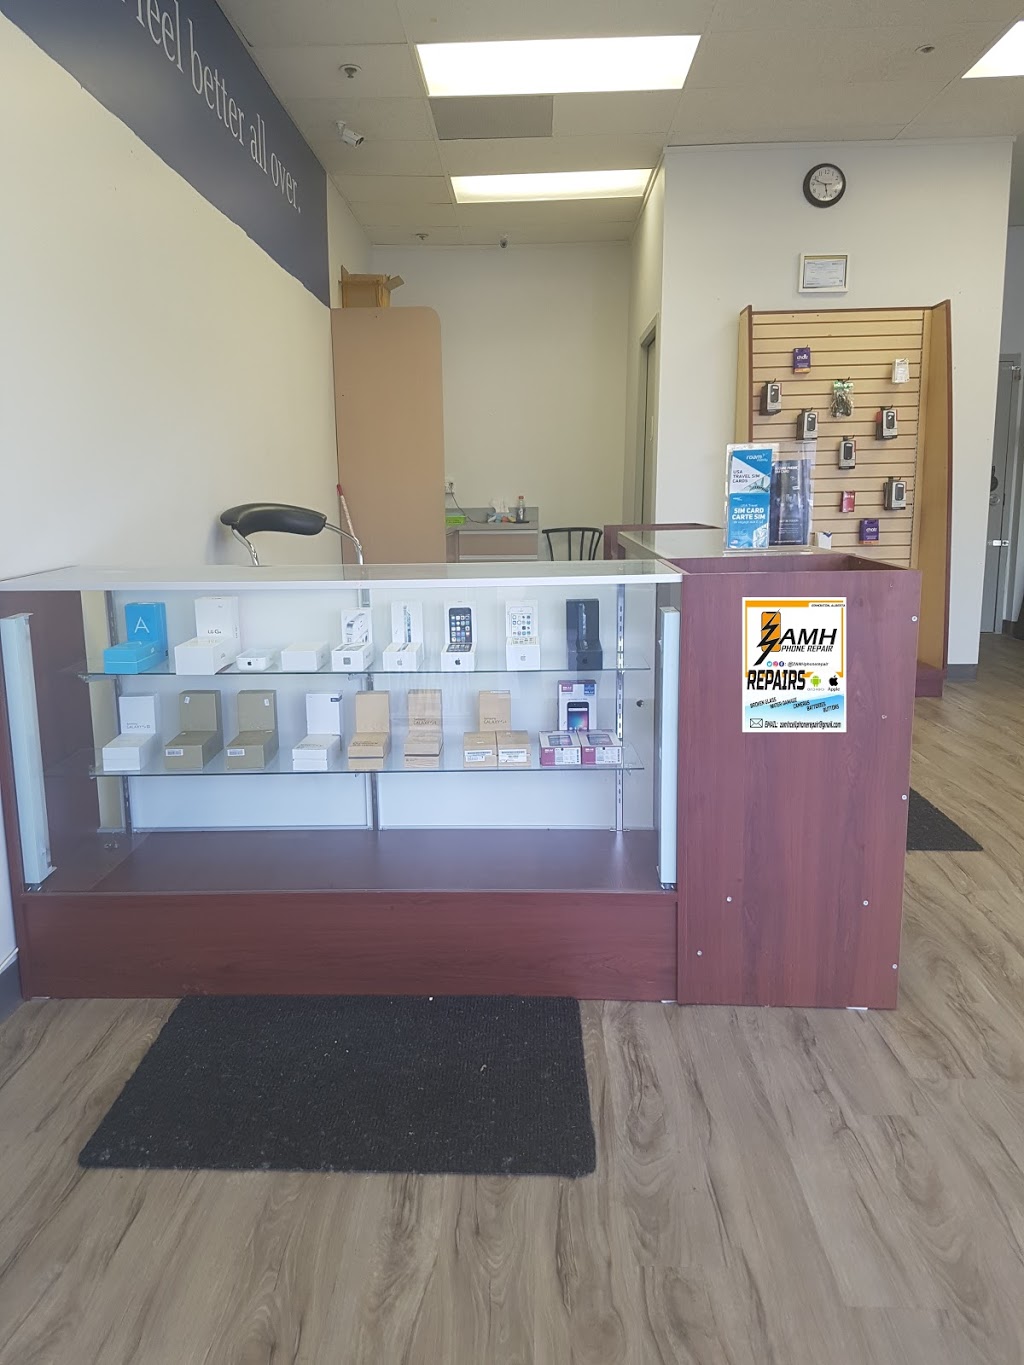 The Cell Shoppe | electronics store | 6102 172 St NW, Edmonton, AB T6M 1G9, Canada | 5878096029 OR +1 587-809-6029